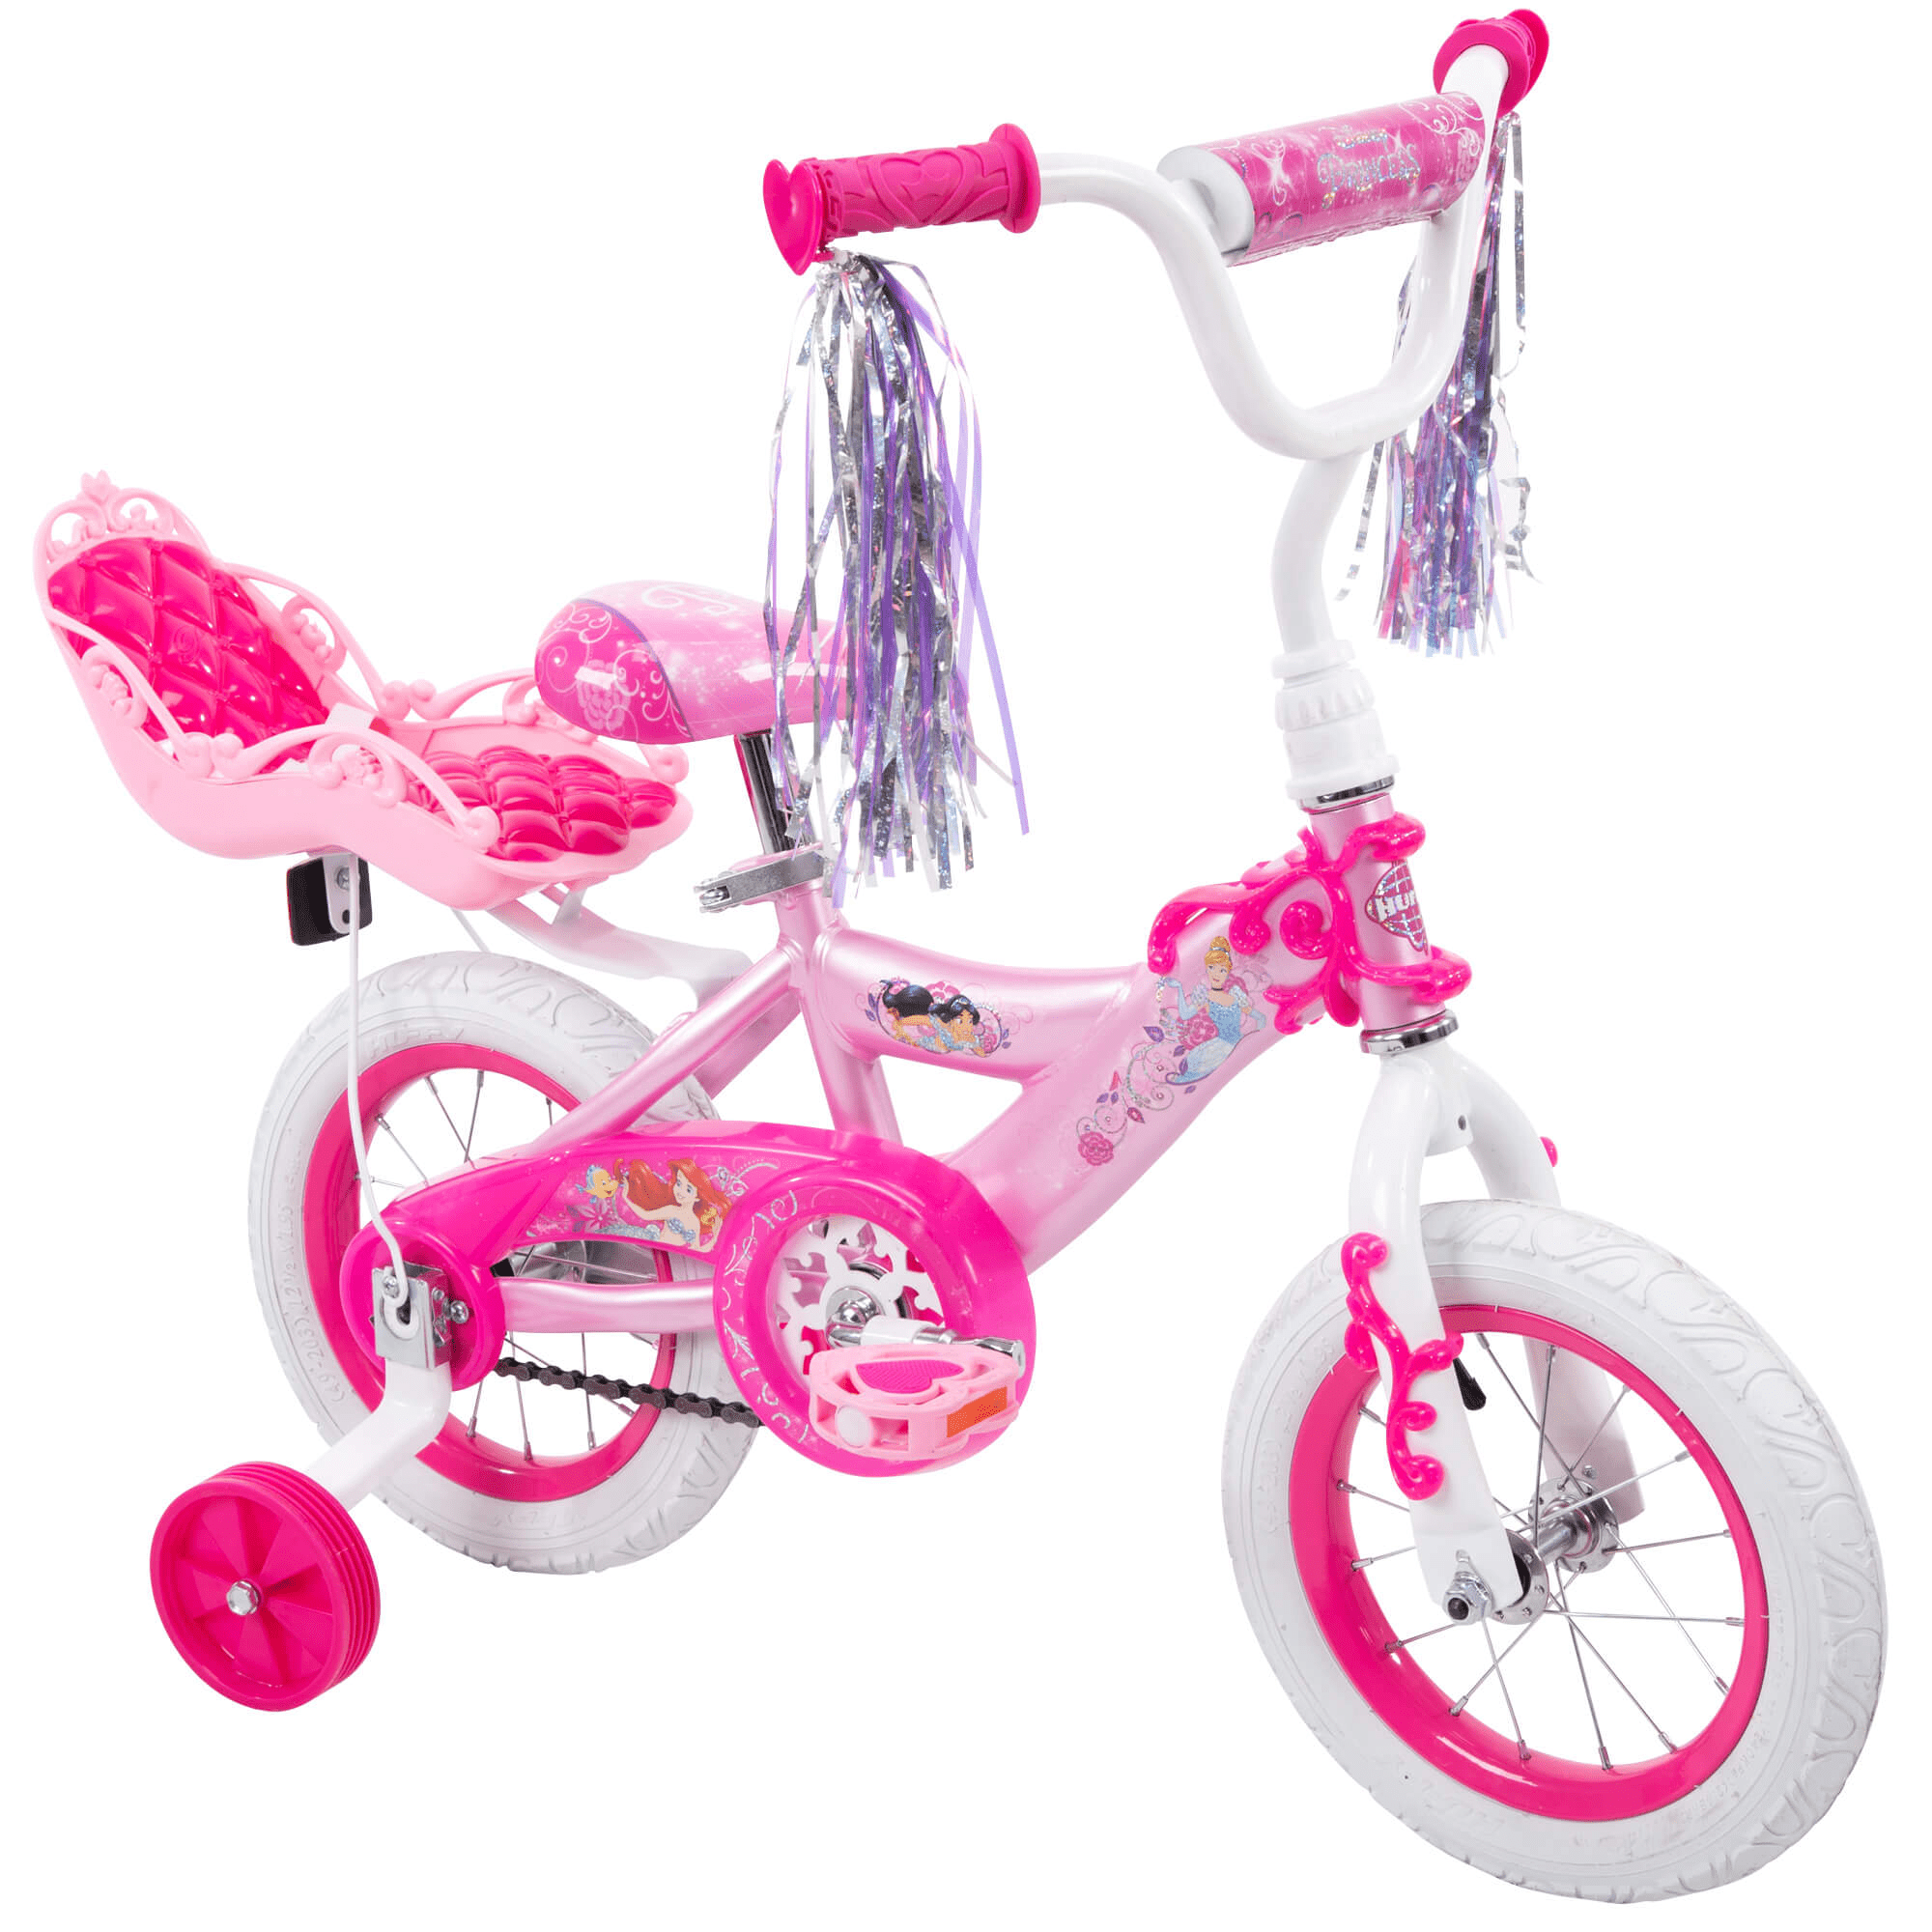 LOL Surprise girls bike L.O.L Purple Pink Turquoise dolls bicycle for kids 